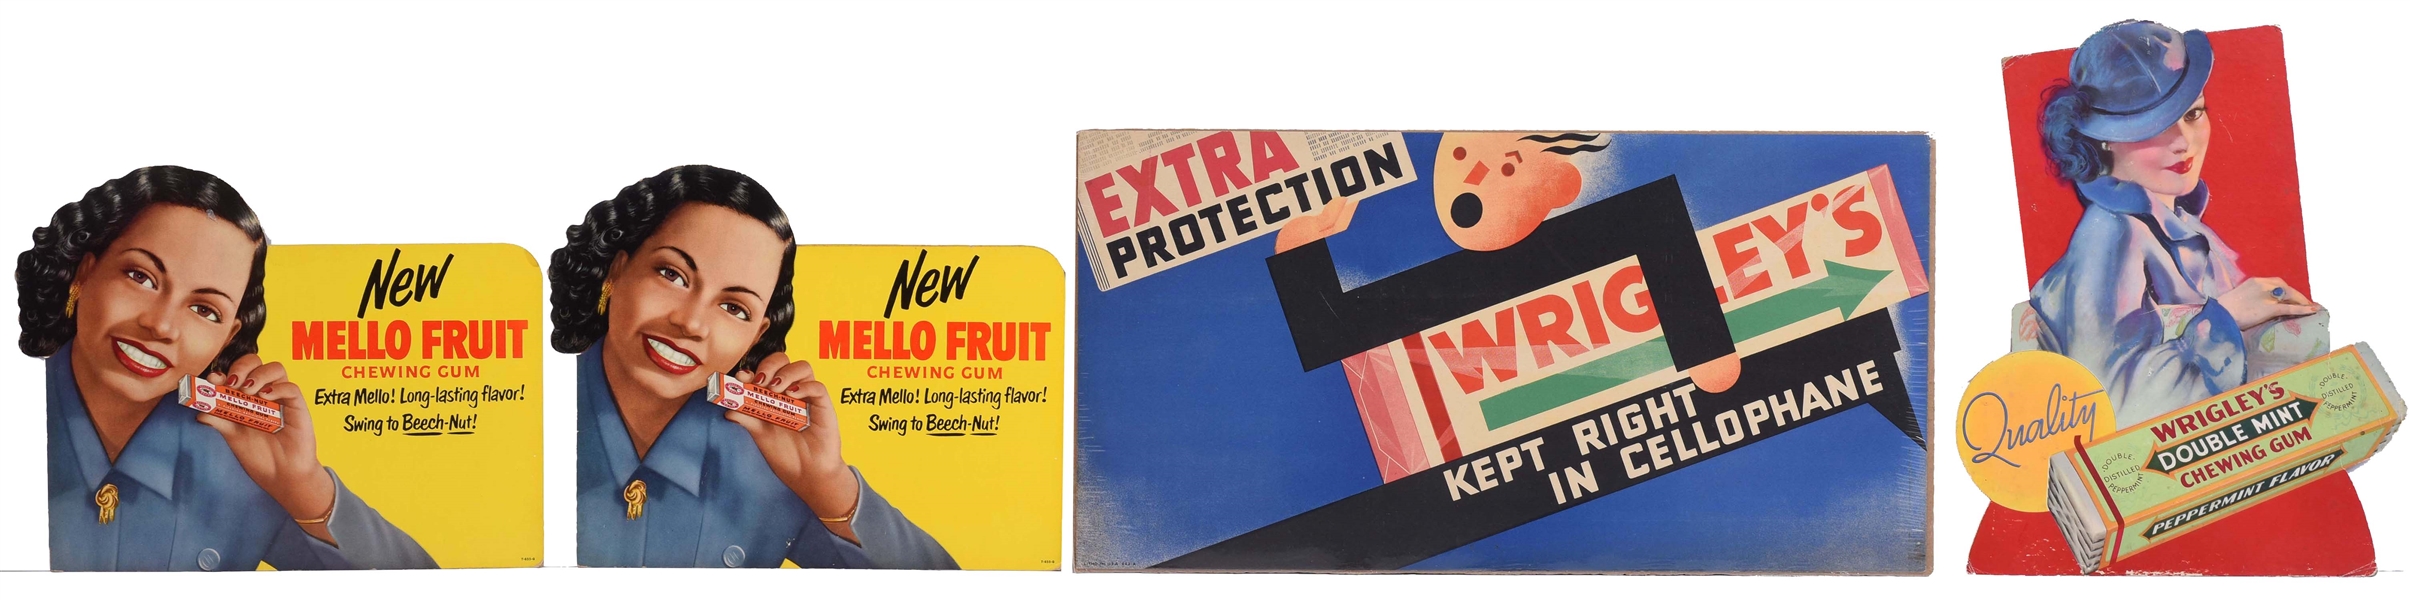 LOT OF 8: CHEWING GUM RELATED ADVERTISING SIGNS.